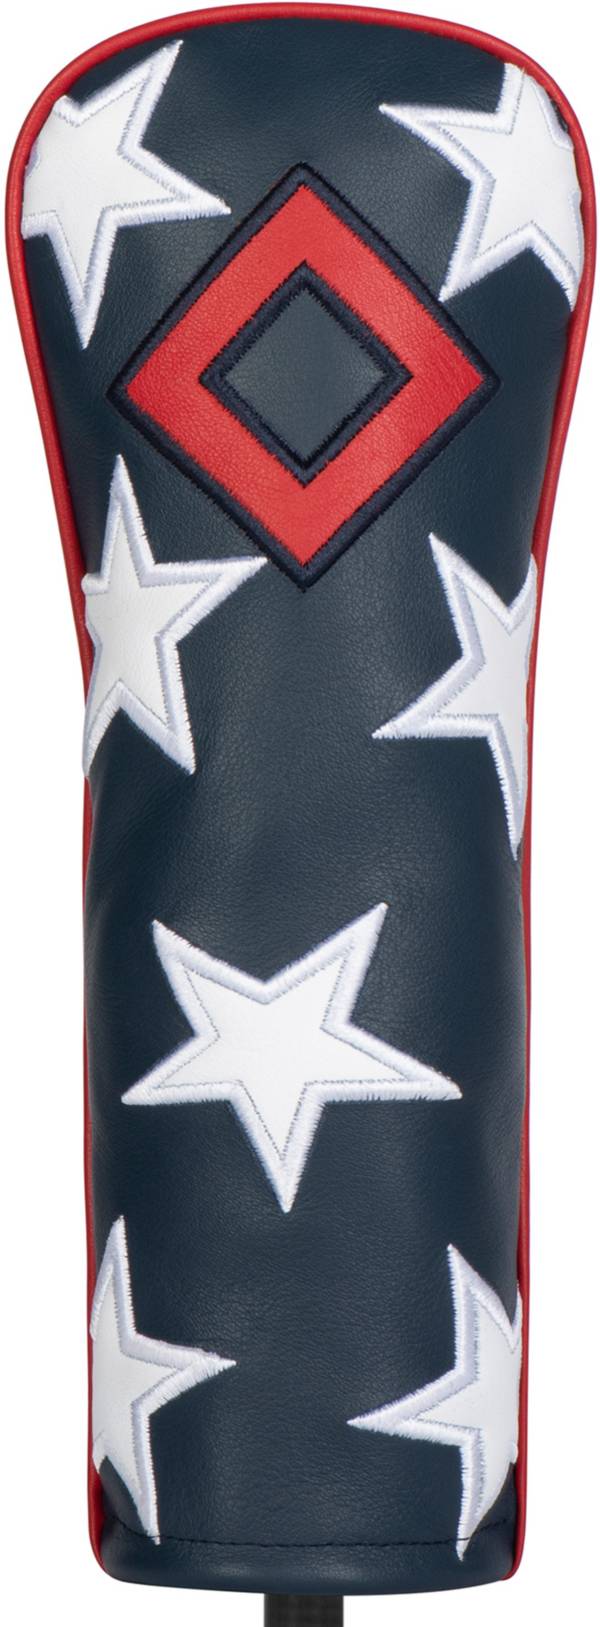 Titleist Stars & Stripes Leather Fairway Headcover product image